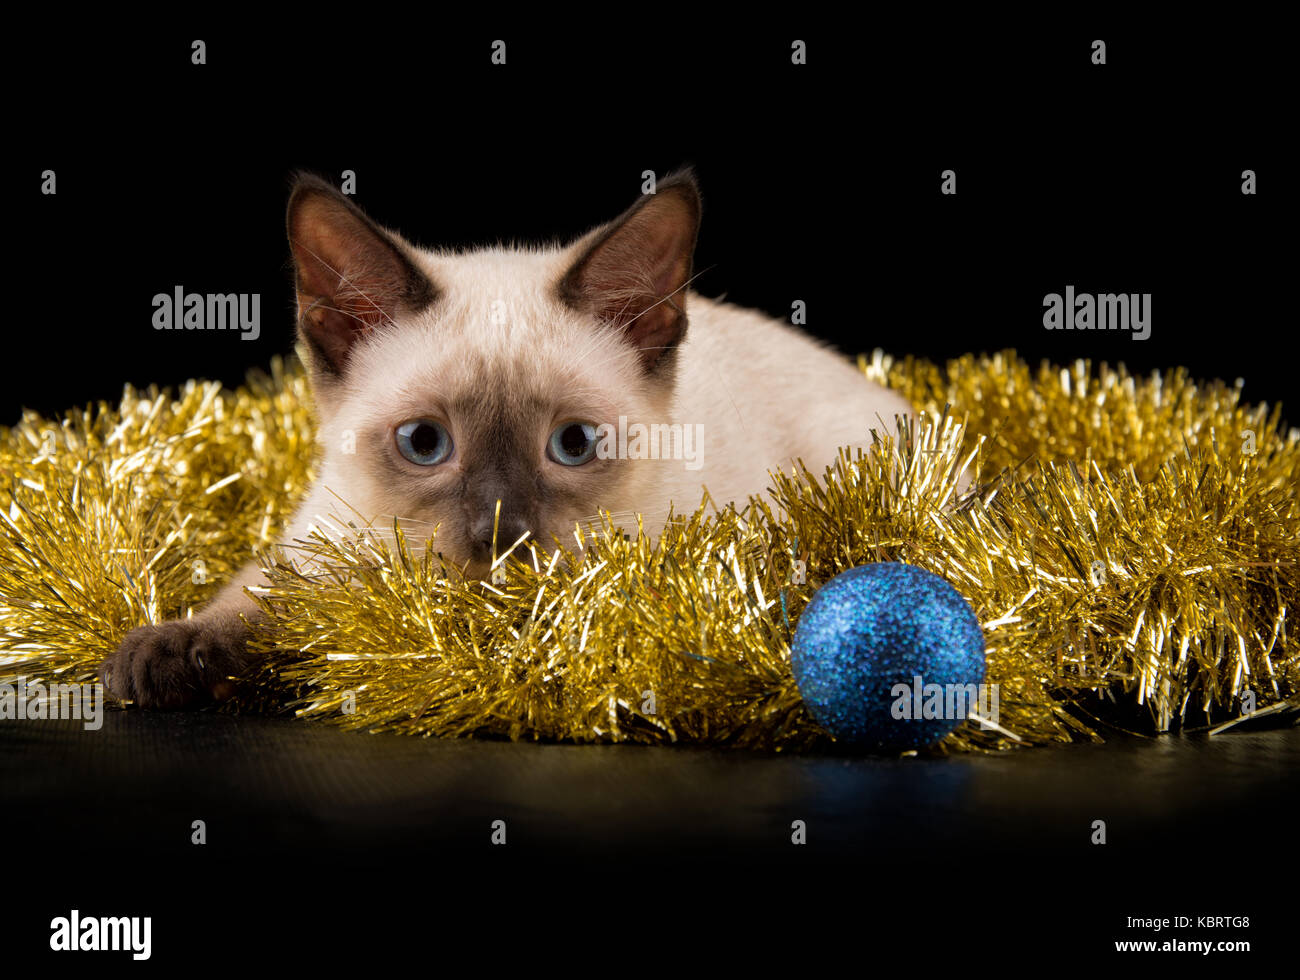 Beautiful siamese kitten in gold tinsel, about to attack a bauble, on black background Stock Photo